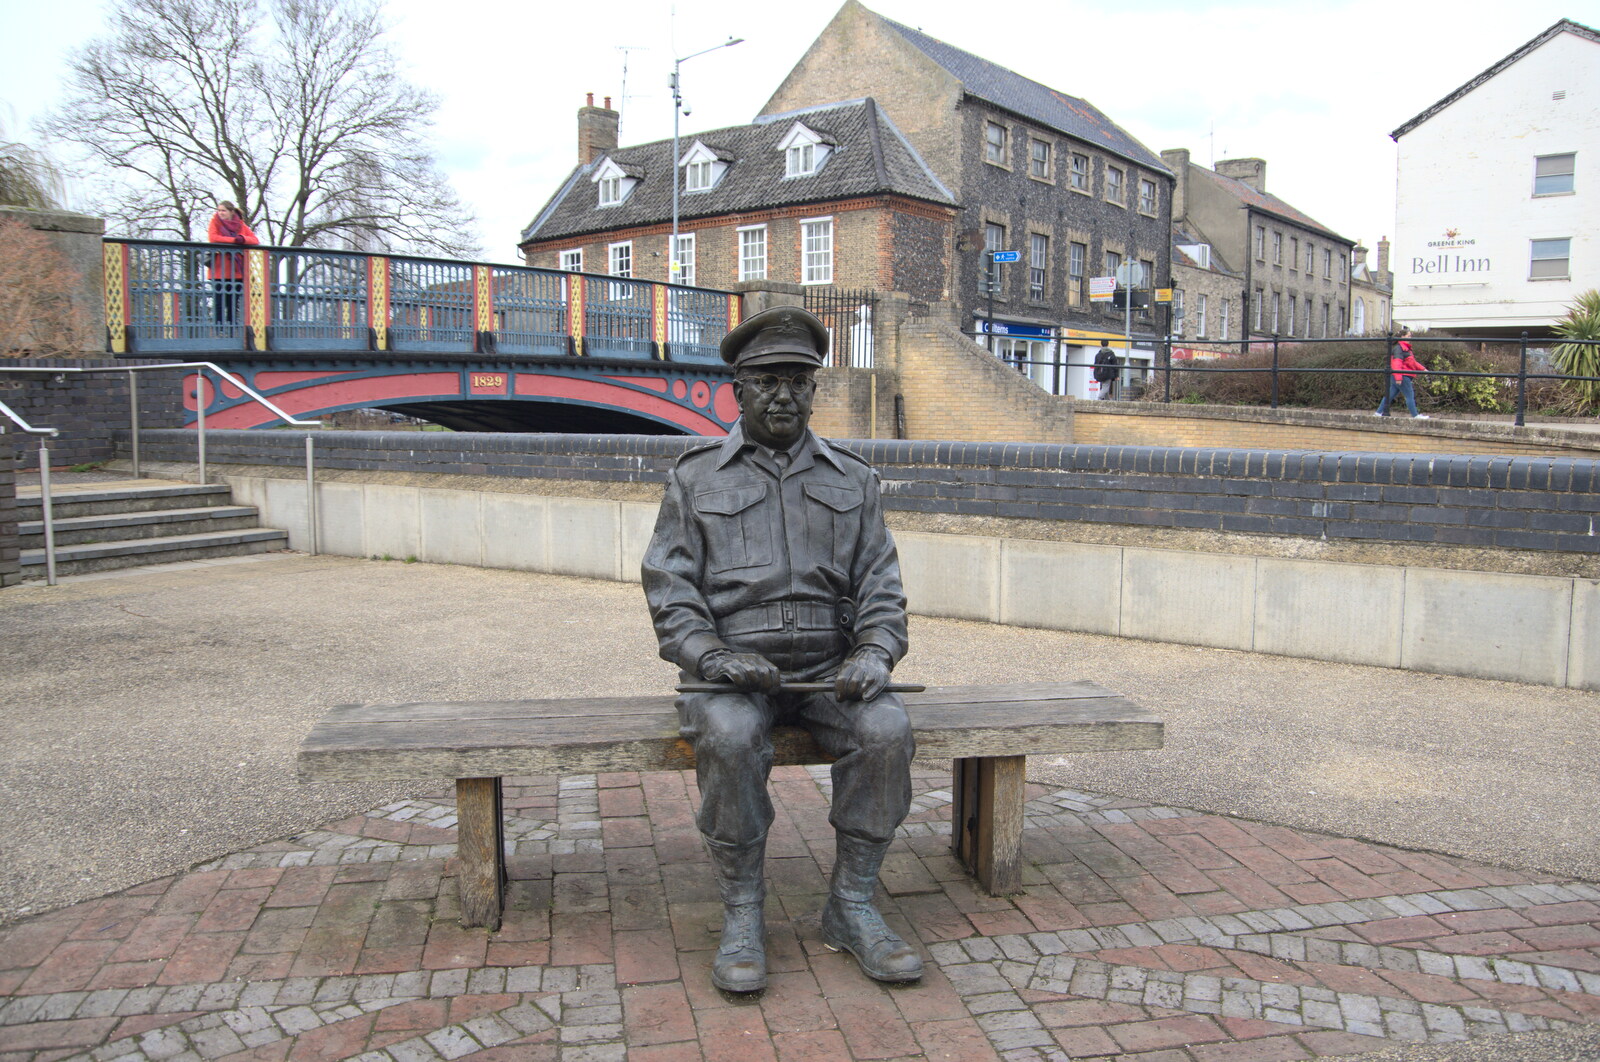 A statue of Captain Mainwaring sits alone from A Postcard from Thetford, Norfolk - 15th March 2023